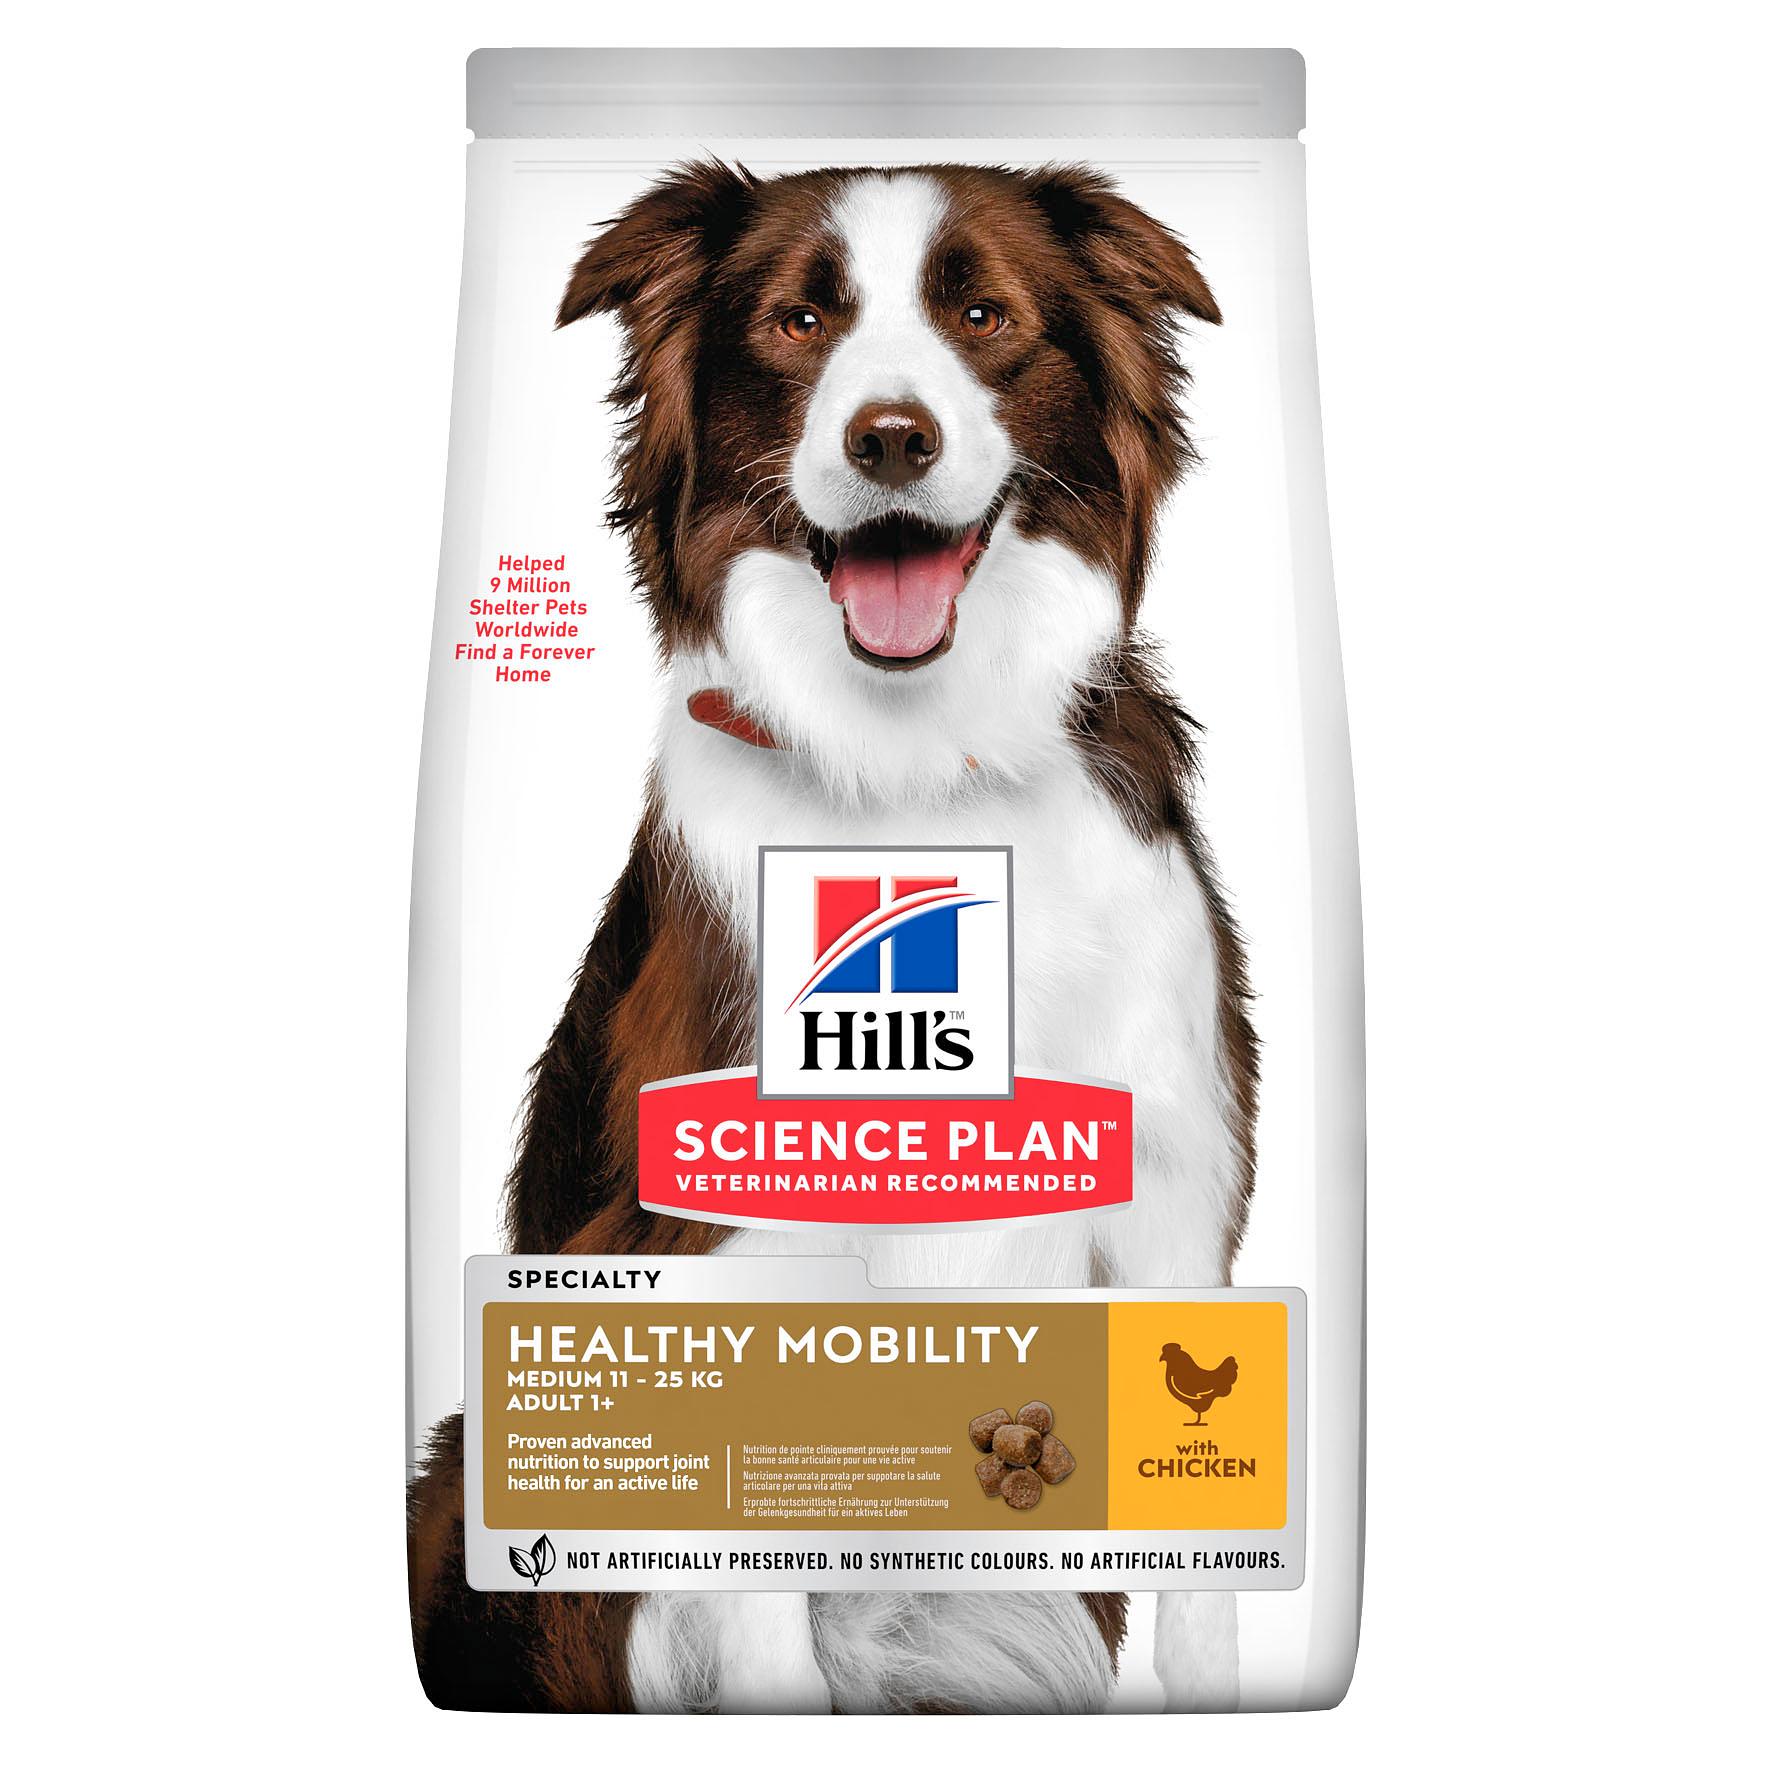 Hill’s Science Plan Adult Healthy Mobility, Medium, Chicken